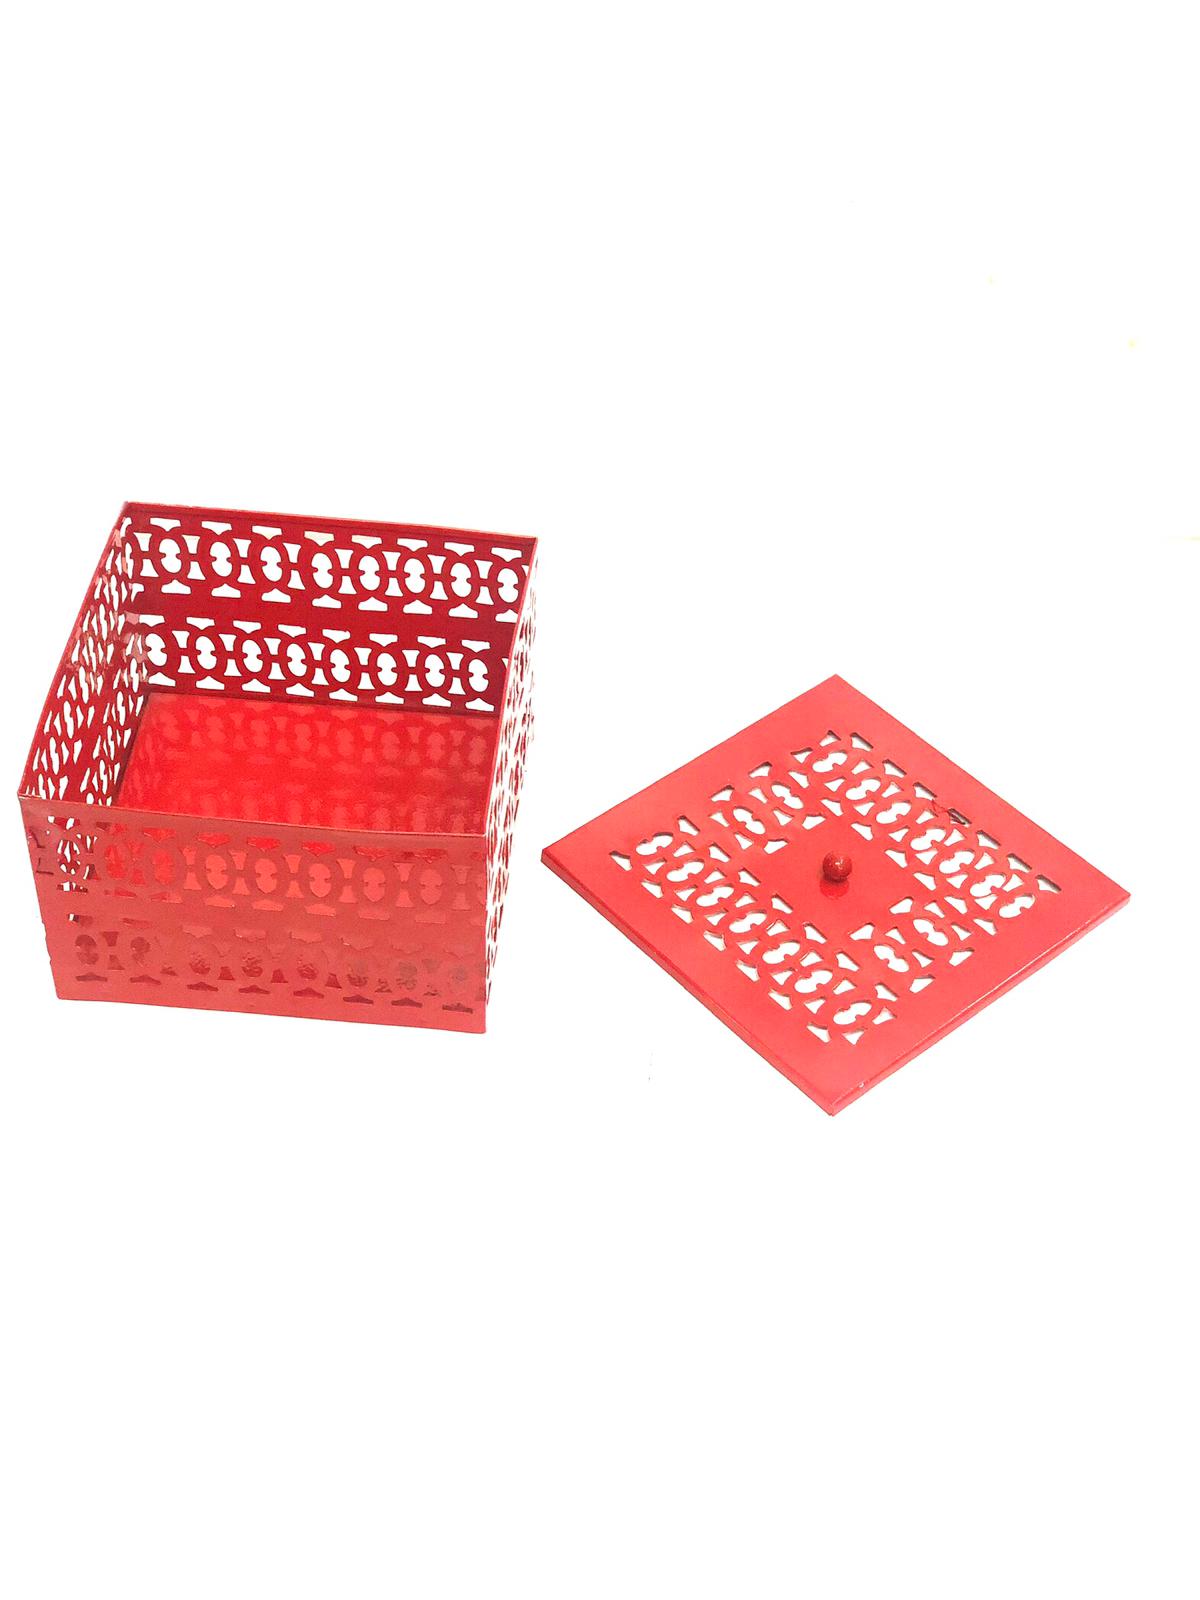 Square Metal Box Storage Jars Carving Handcrafted In India From Tamrapatra